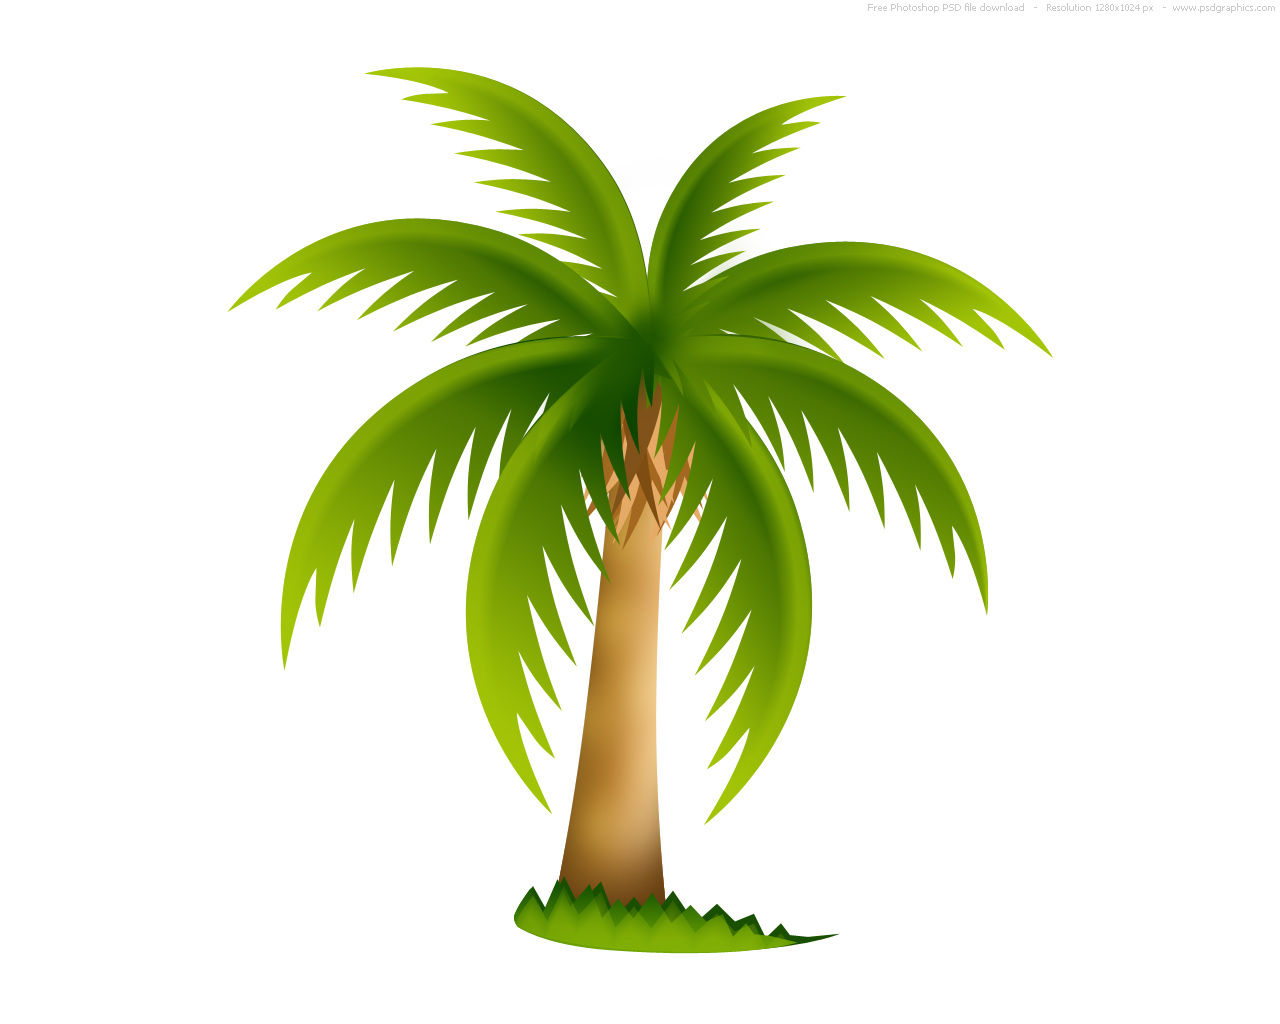 Palm tree free images at vector clip art online